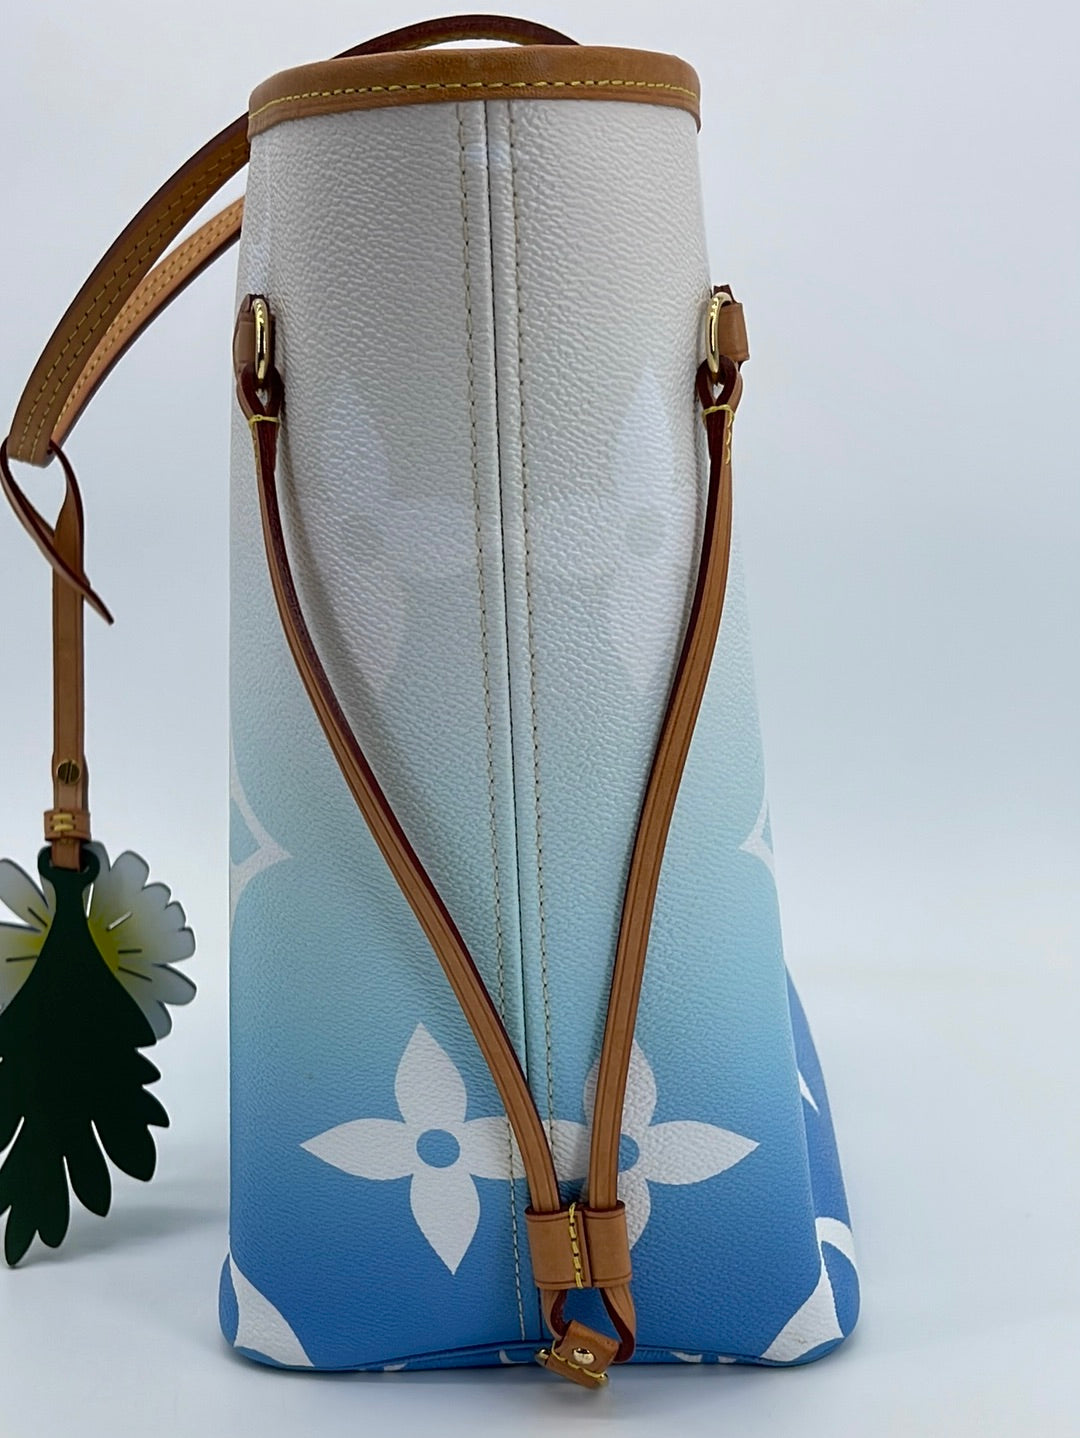 Preloved Limited Edition Louis Vuitton Neverfull mm by The Pool Tote 8HGTQ4M 091823